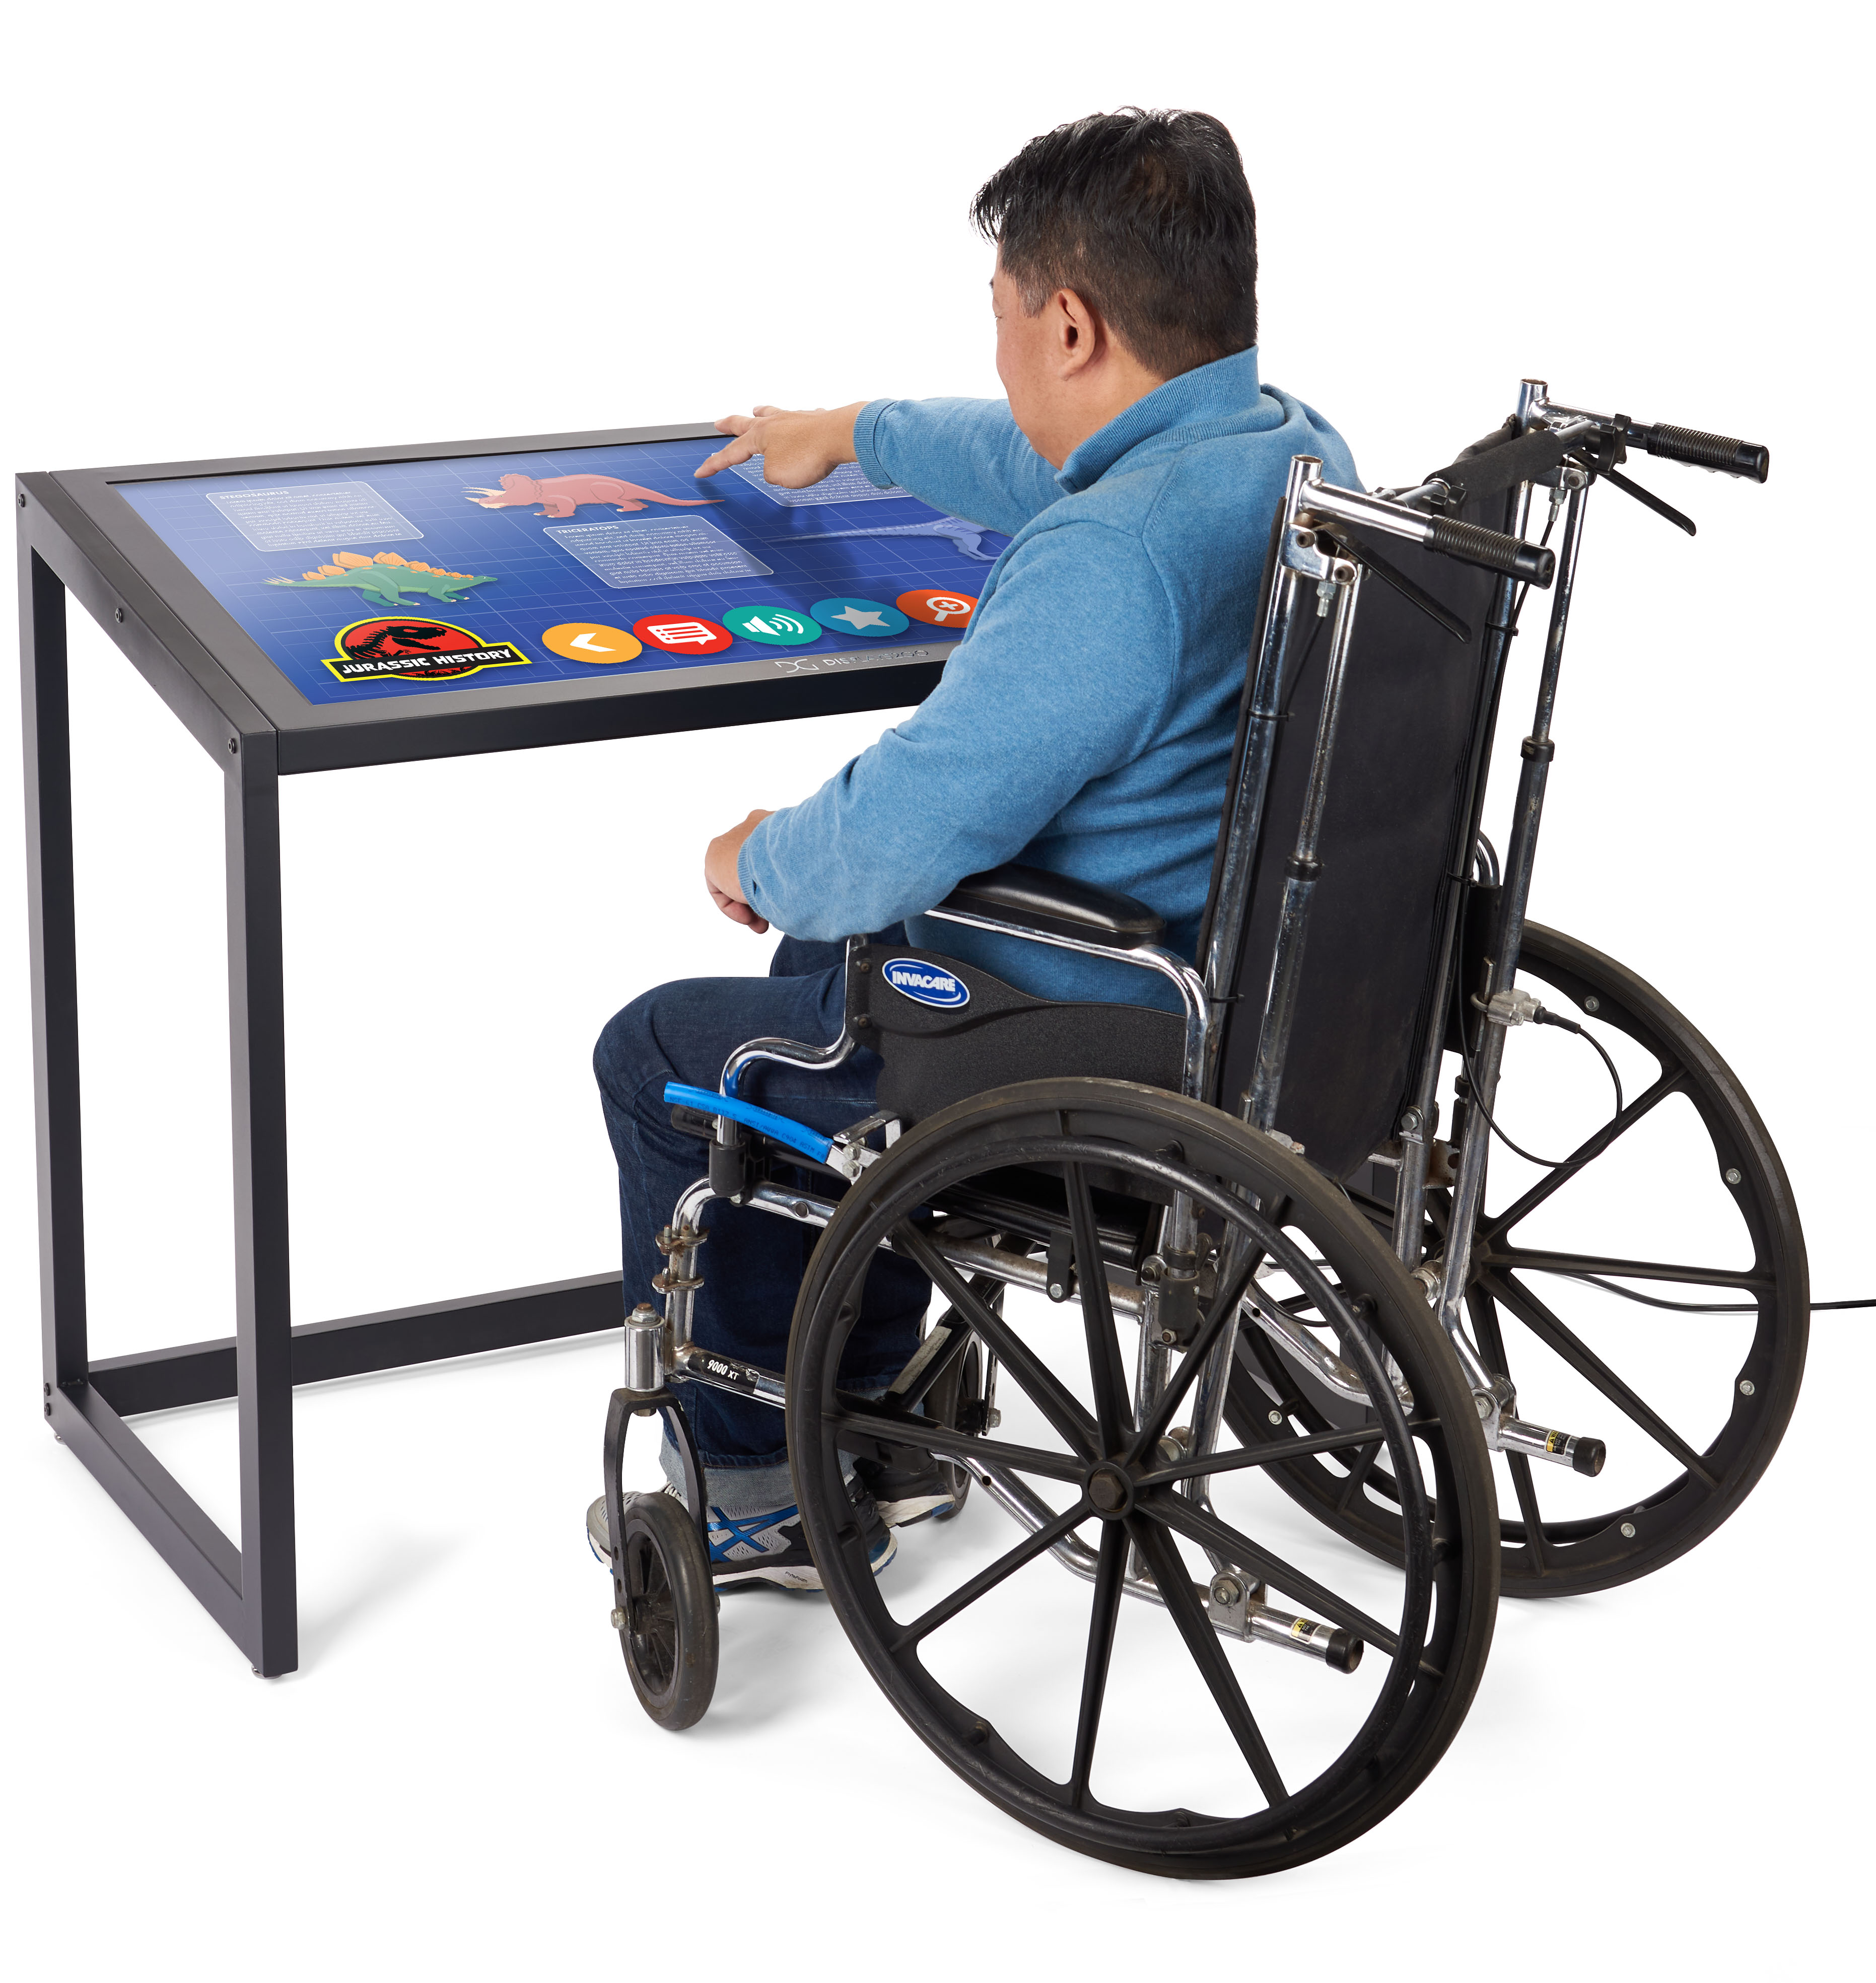 Man in wheelchair using touch screen table